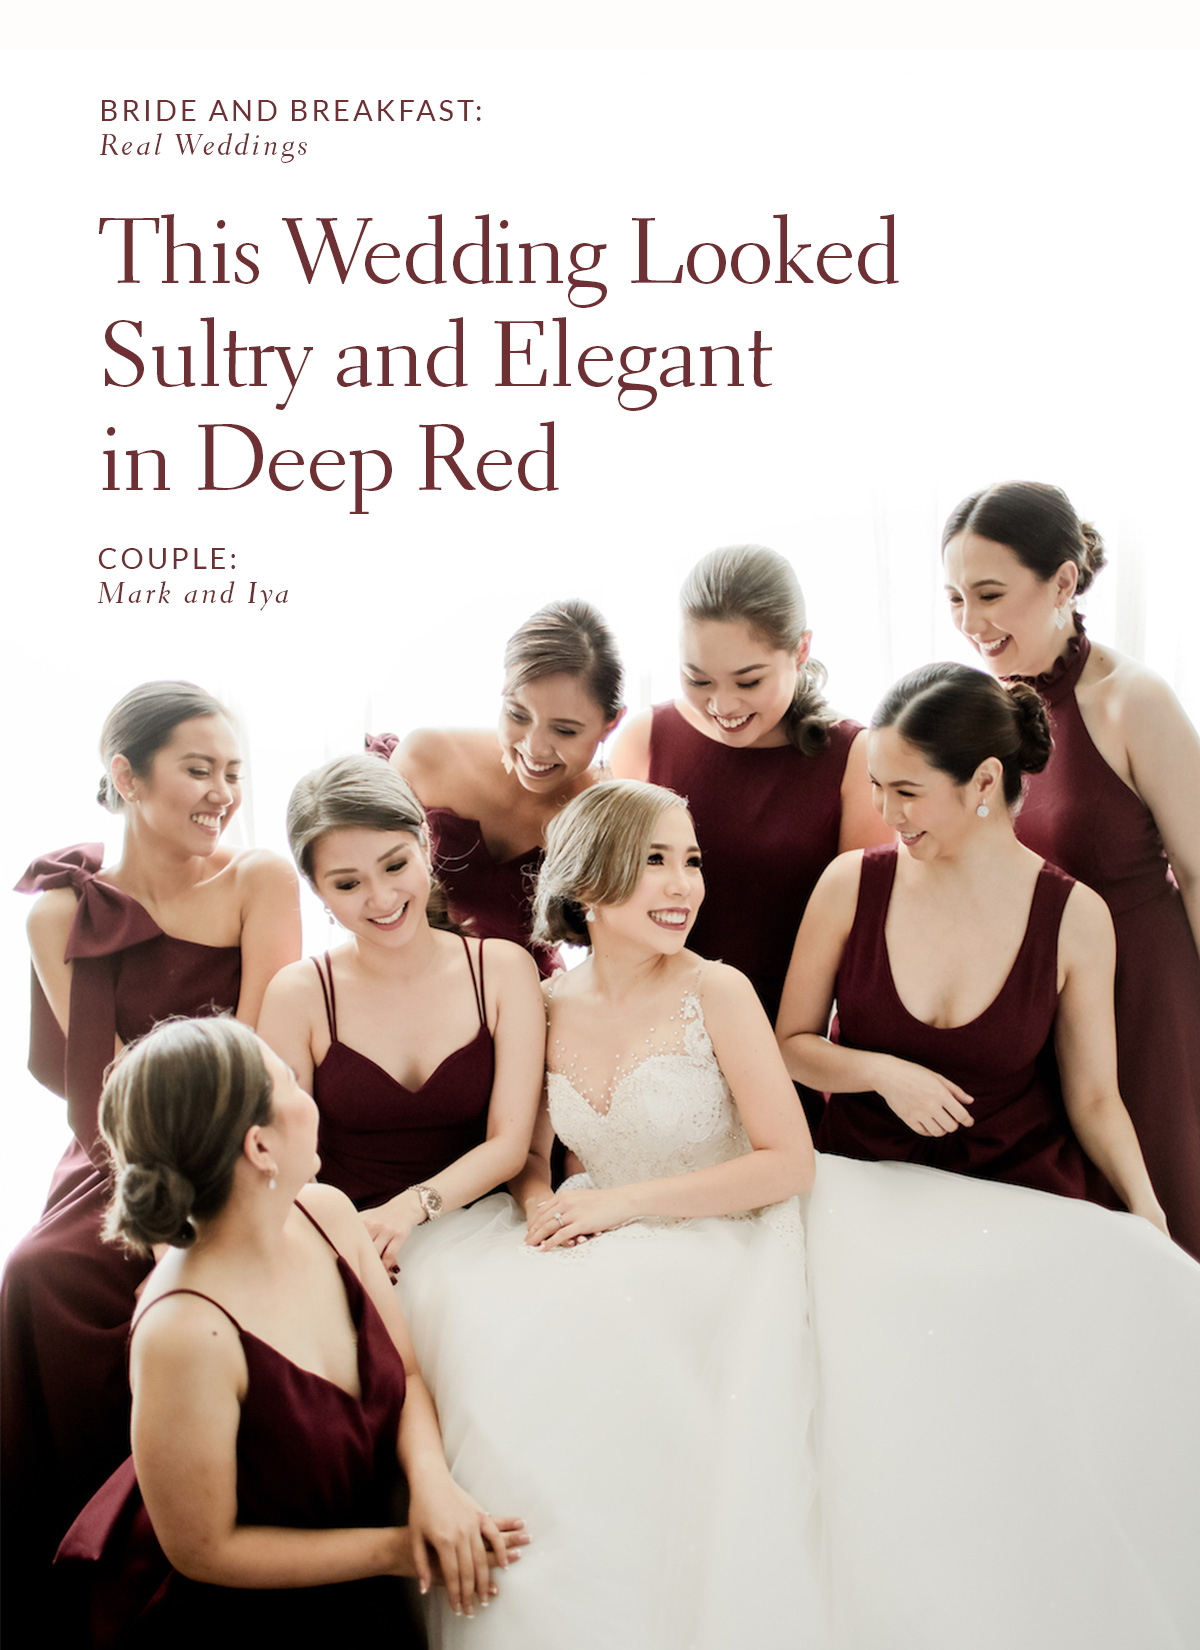 This Wedding Looked Sultry and Elegant in Deep Red